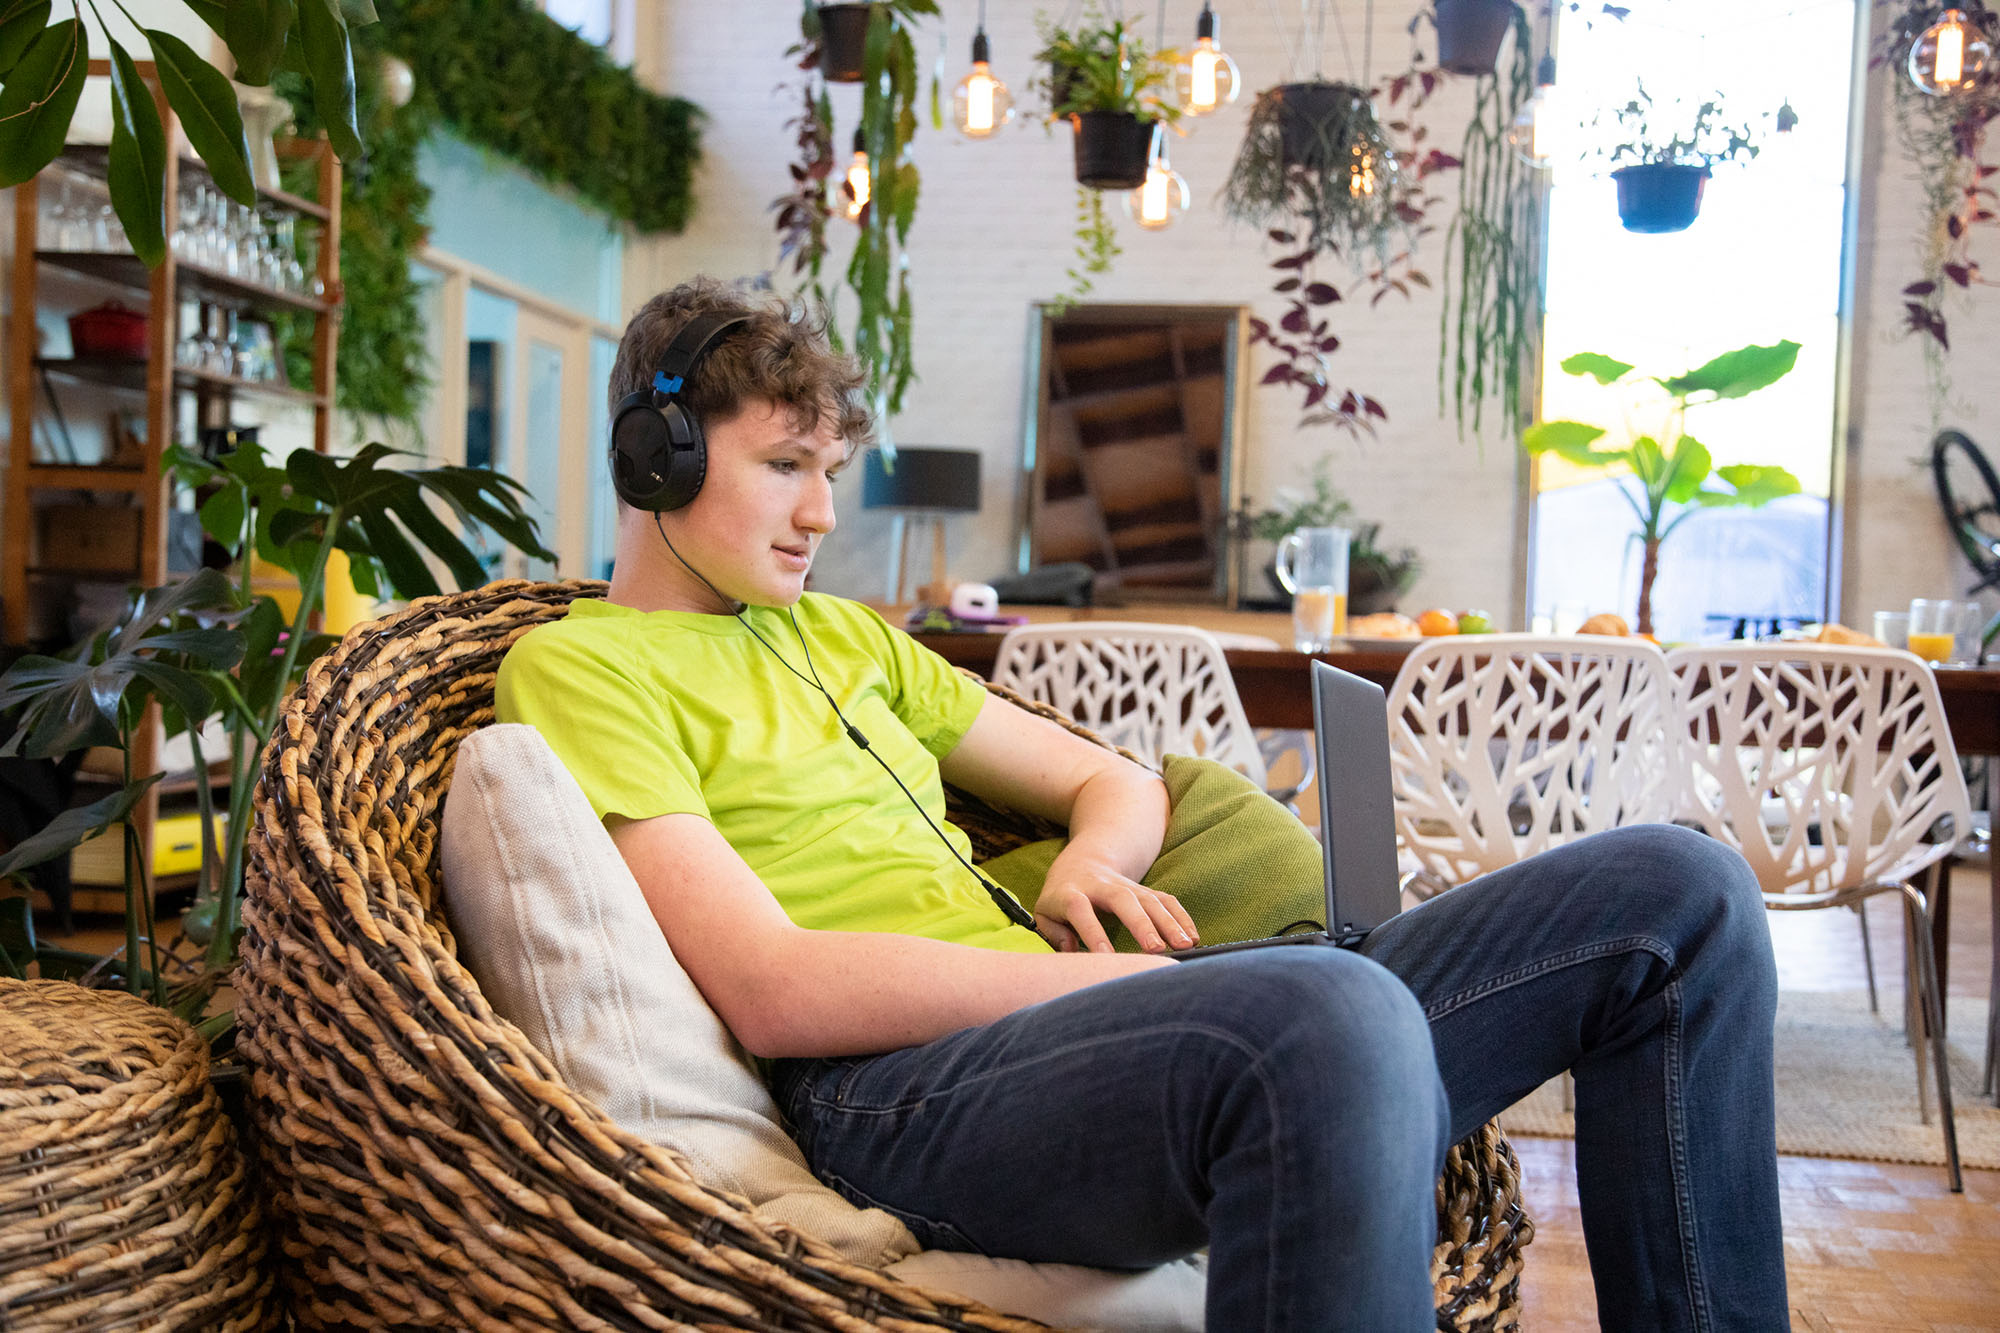 autistic boy hanging out with headphones on